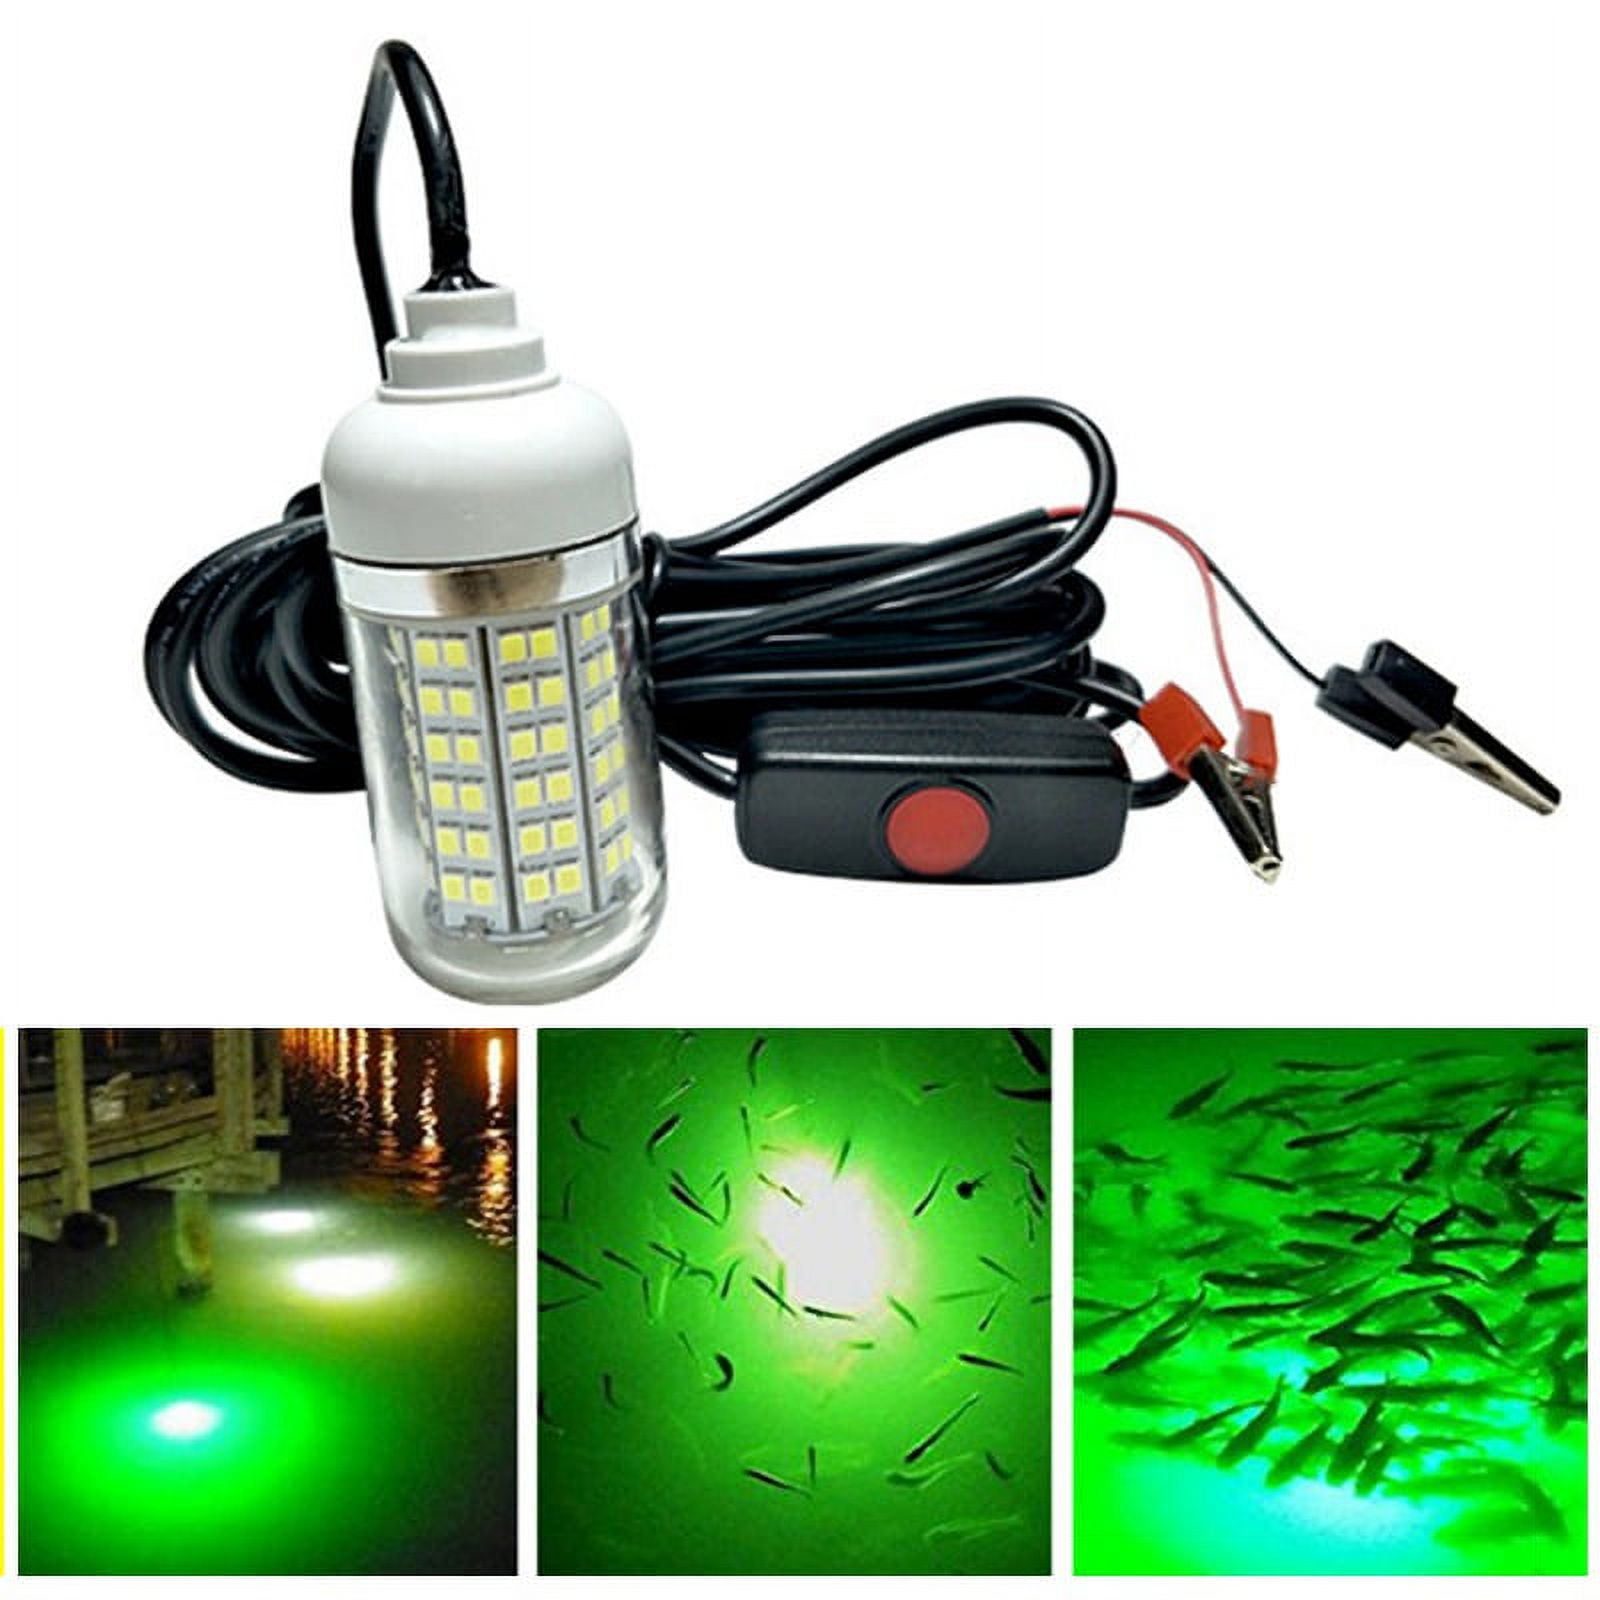 How LED lights can help with night fishing or squid fishing – Hunts Marine